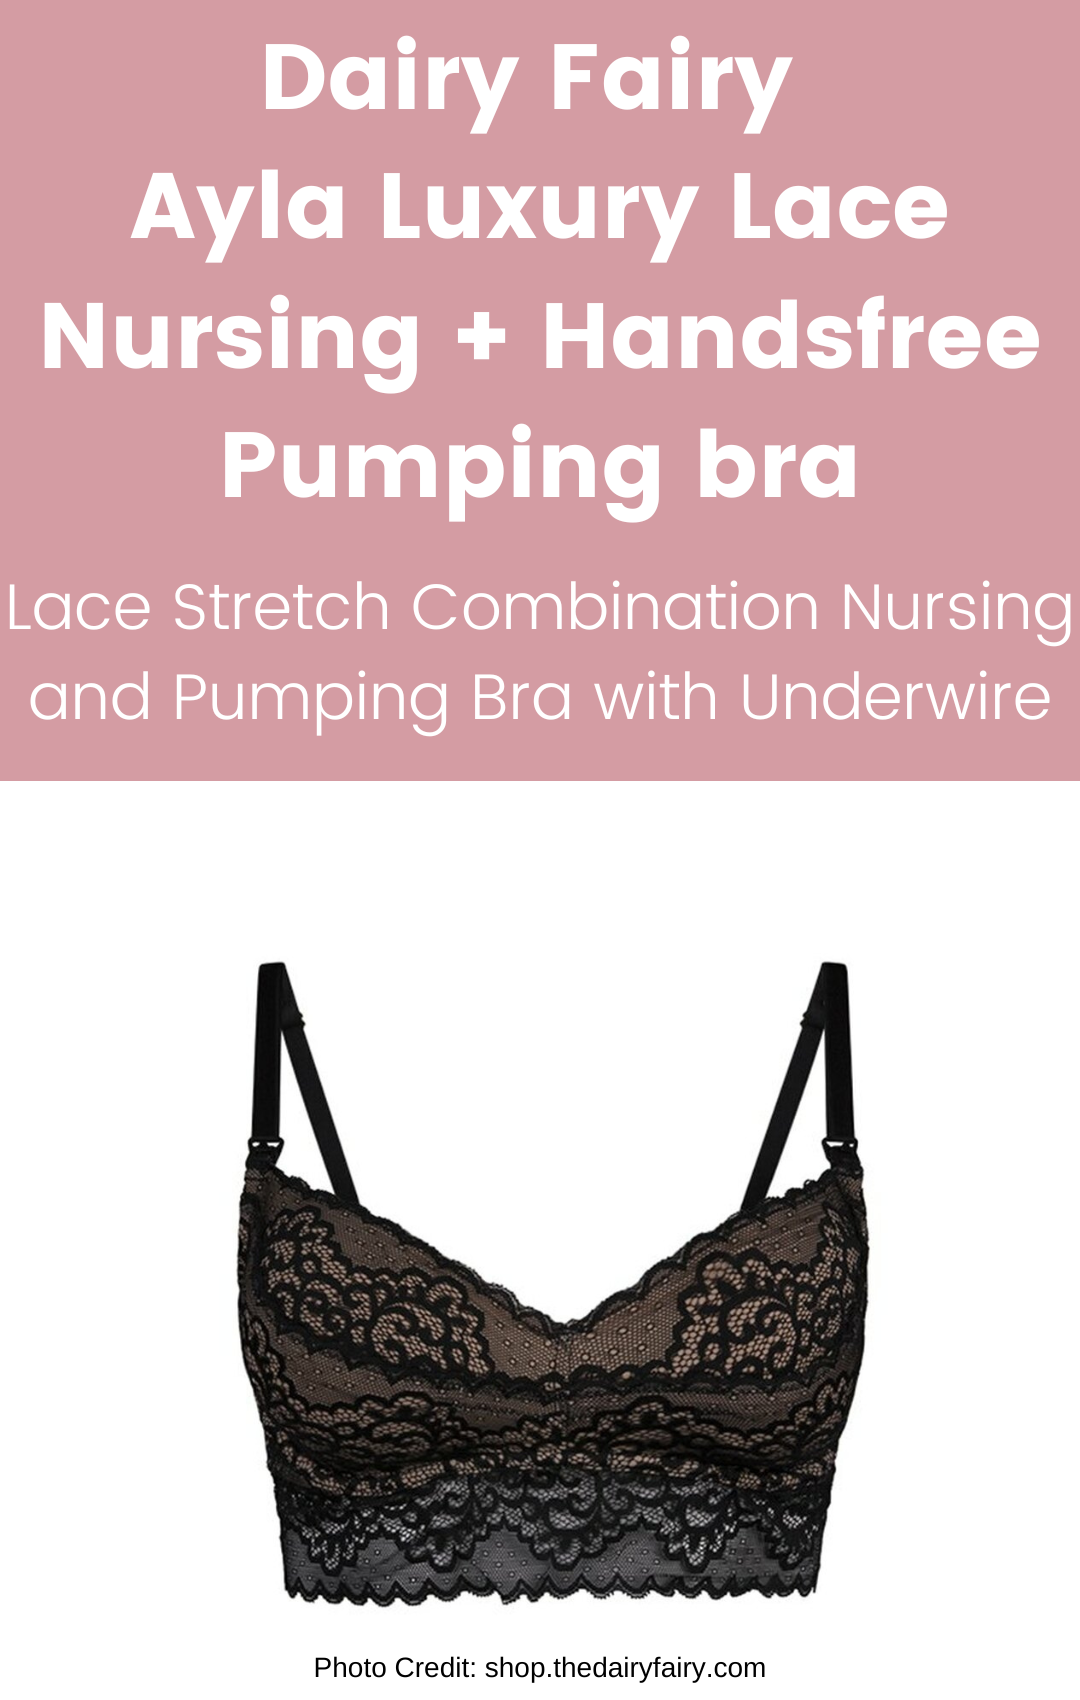 Breastmates Hands-Free Pumping Bra - the game changer for mums